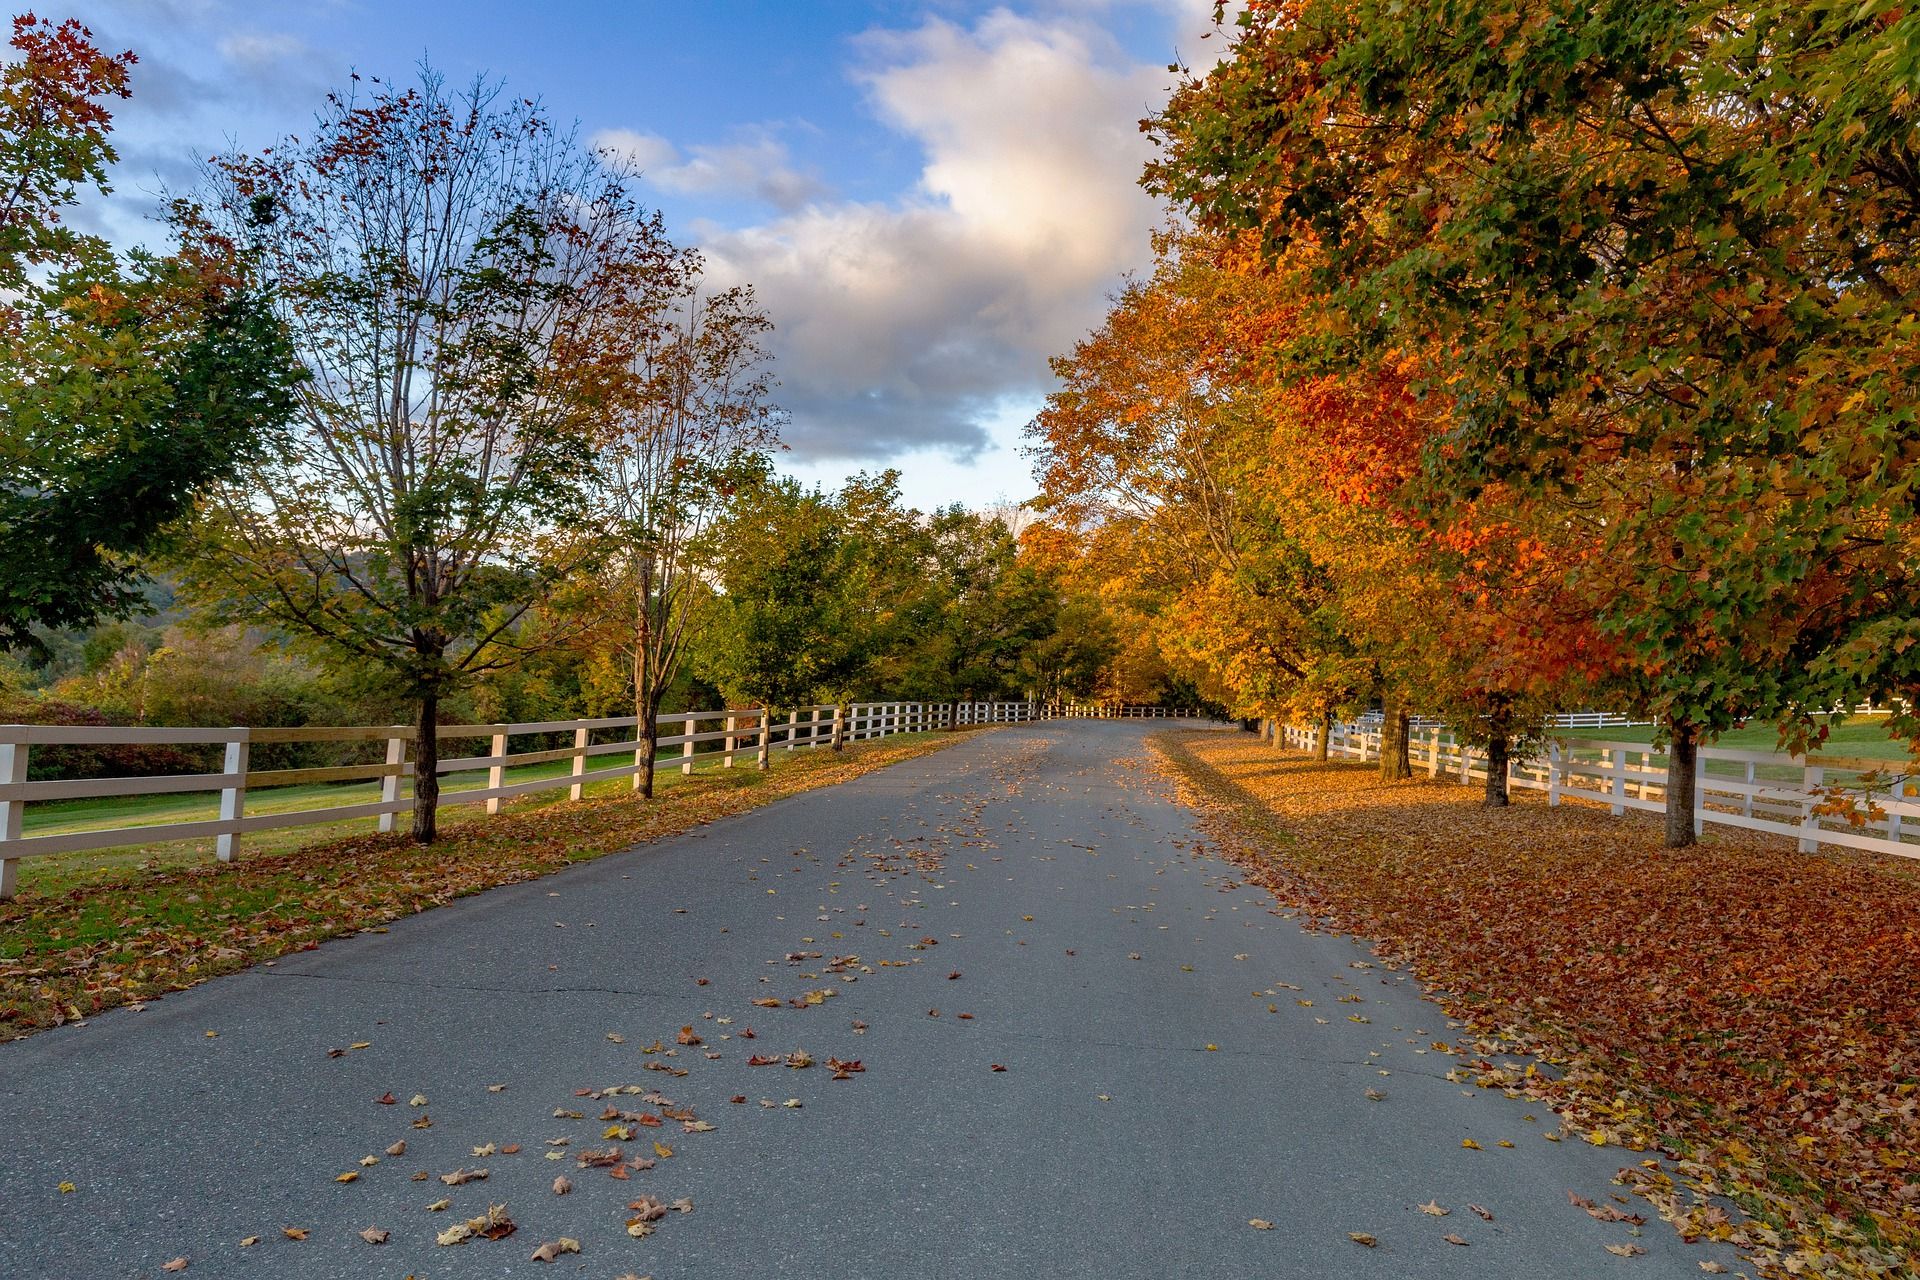 A road in Woodstock, one of the best places in Vermont, New England, covered with fall leaves